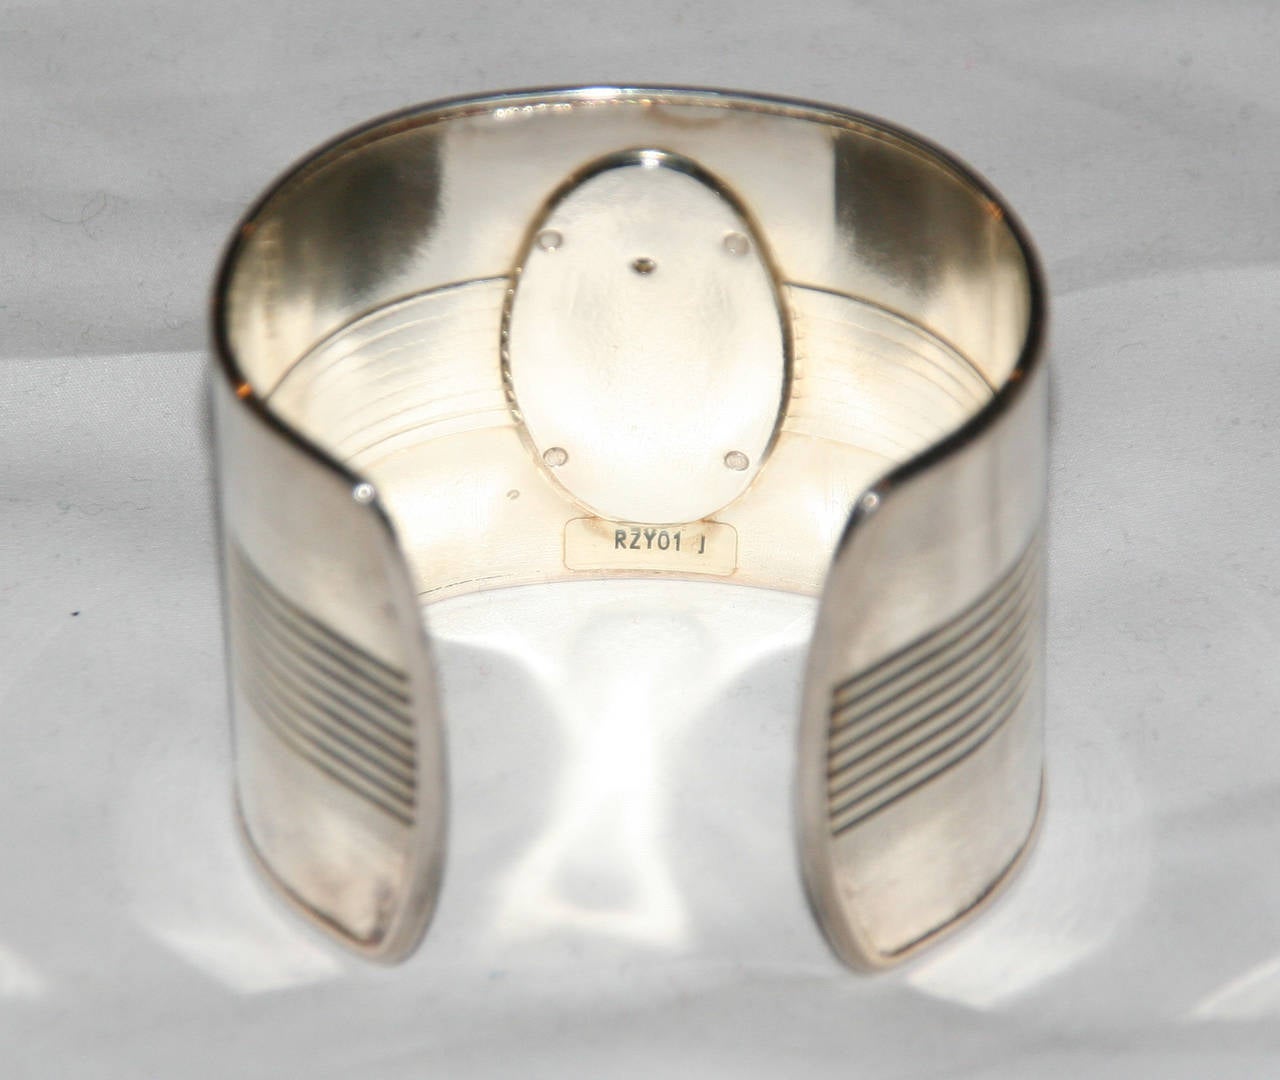 Fantastic JPG Perfume Cuff of 1993. The Classic Perfume Bottle. Chrome and pink silver plated metal. Width: 5.5 cm - 2.2 in, opening: 2.5 cm - 1 in.